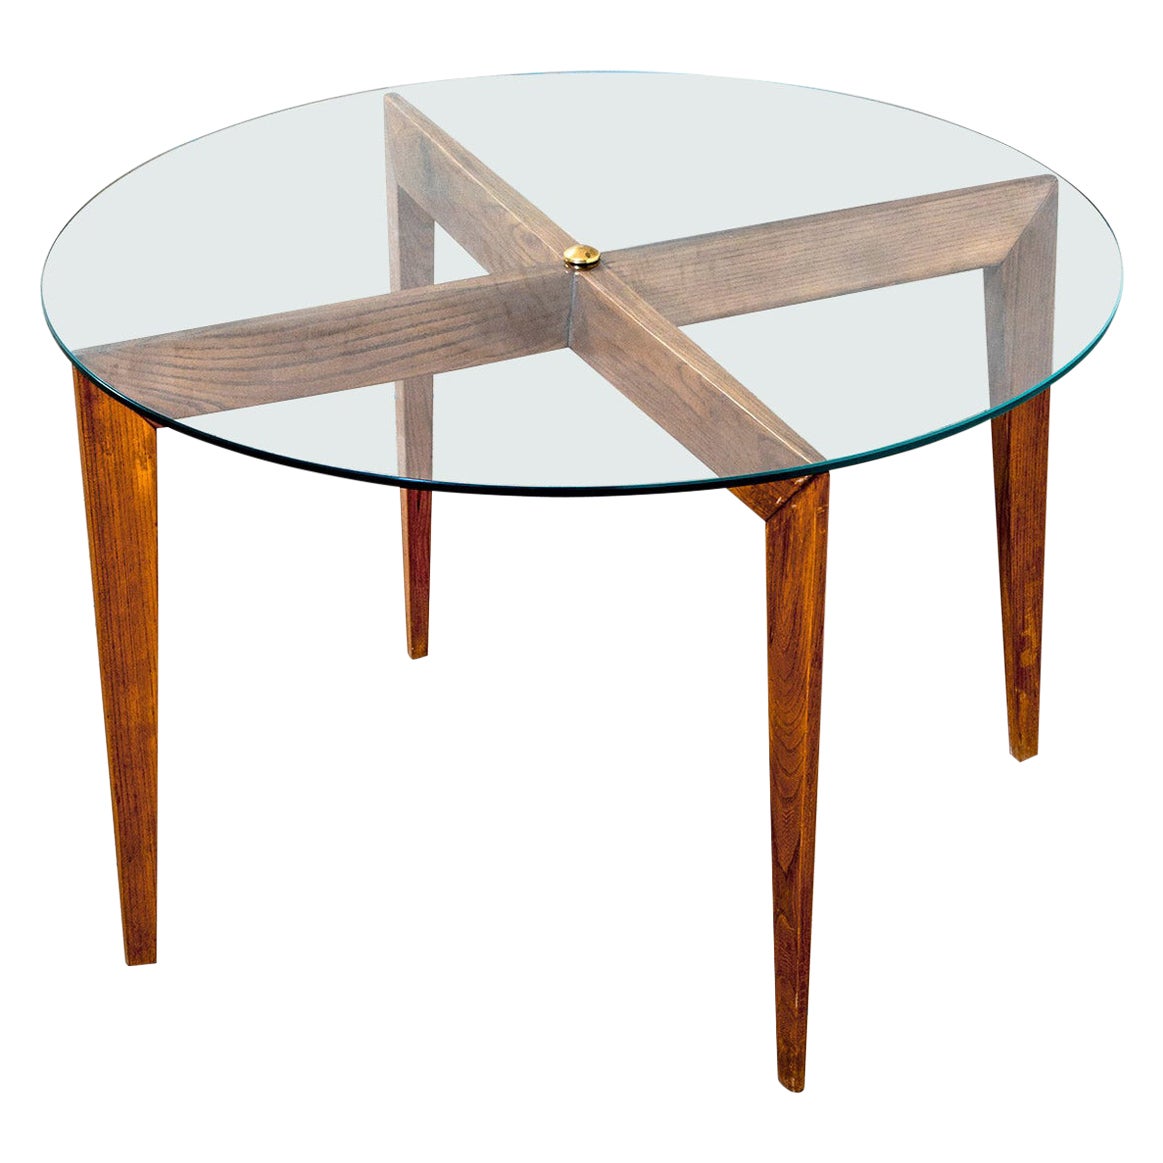 20th Century Gio Ponti Coffee Table for Isa Bergamo in Wood with Round Glass Top For Sale